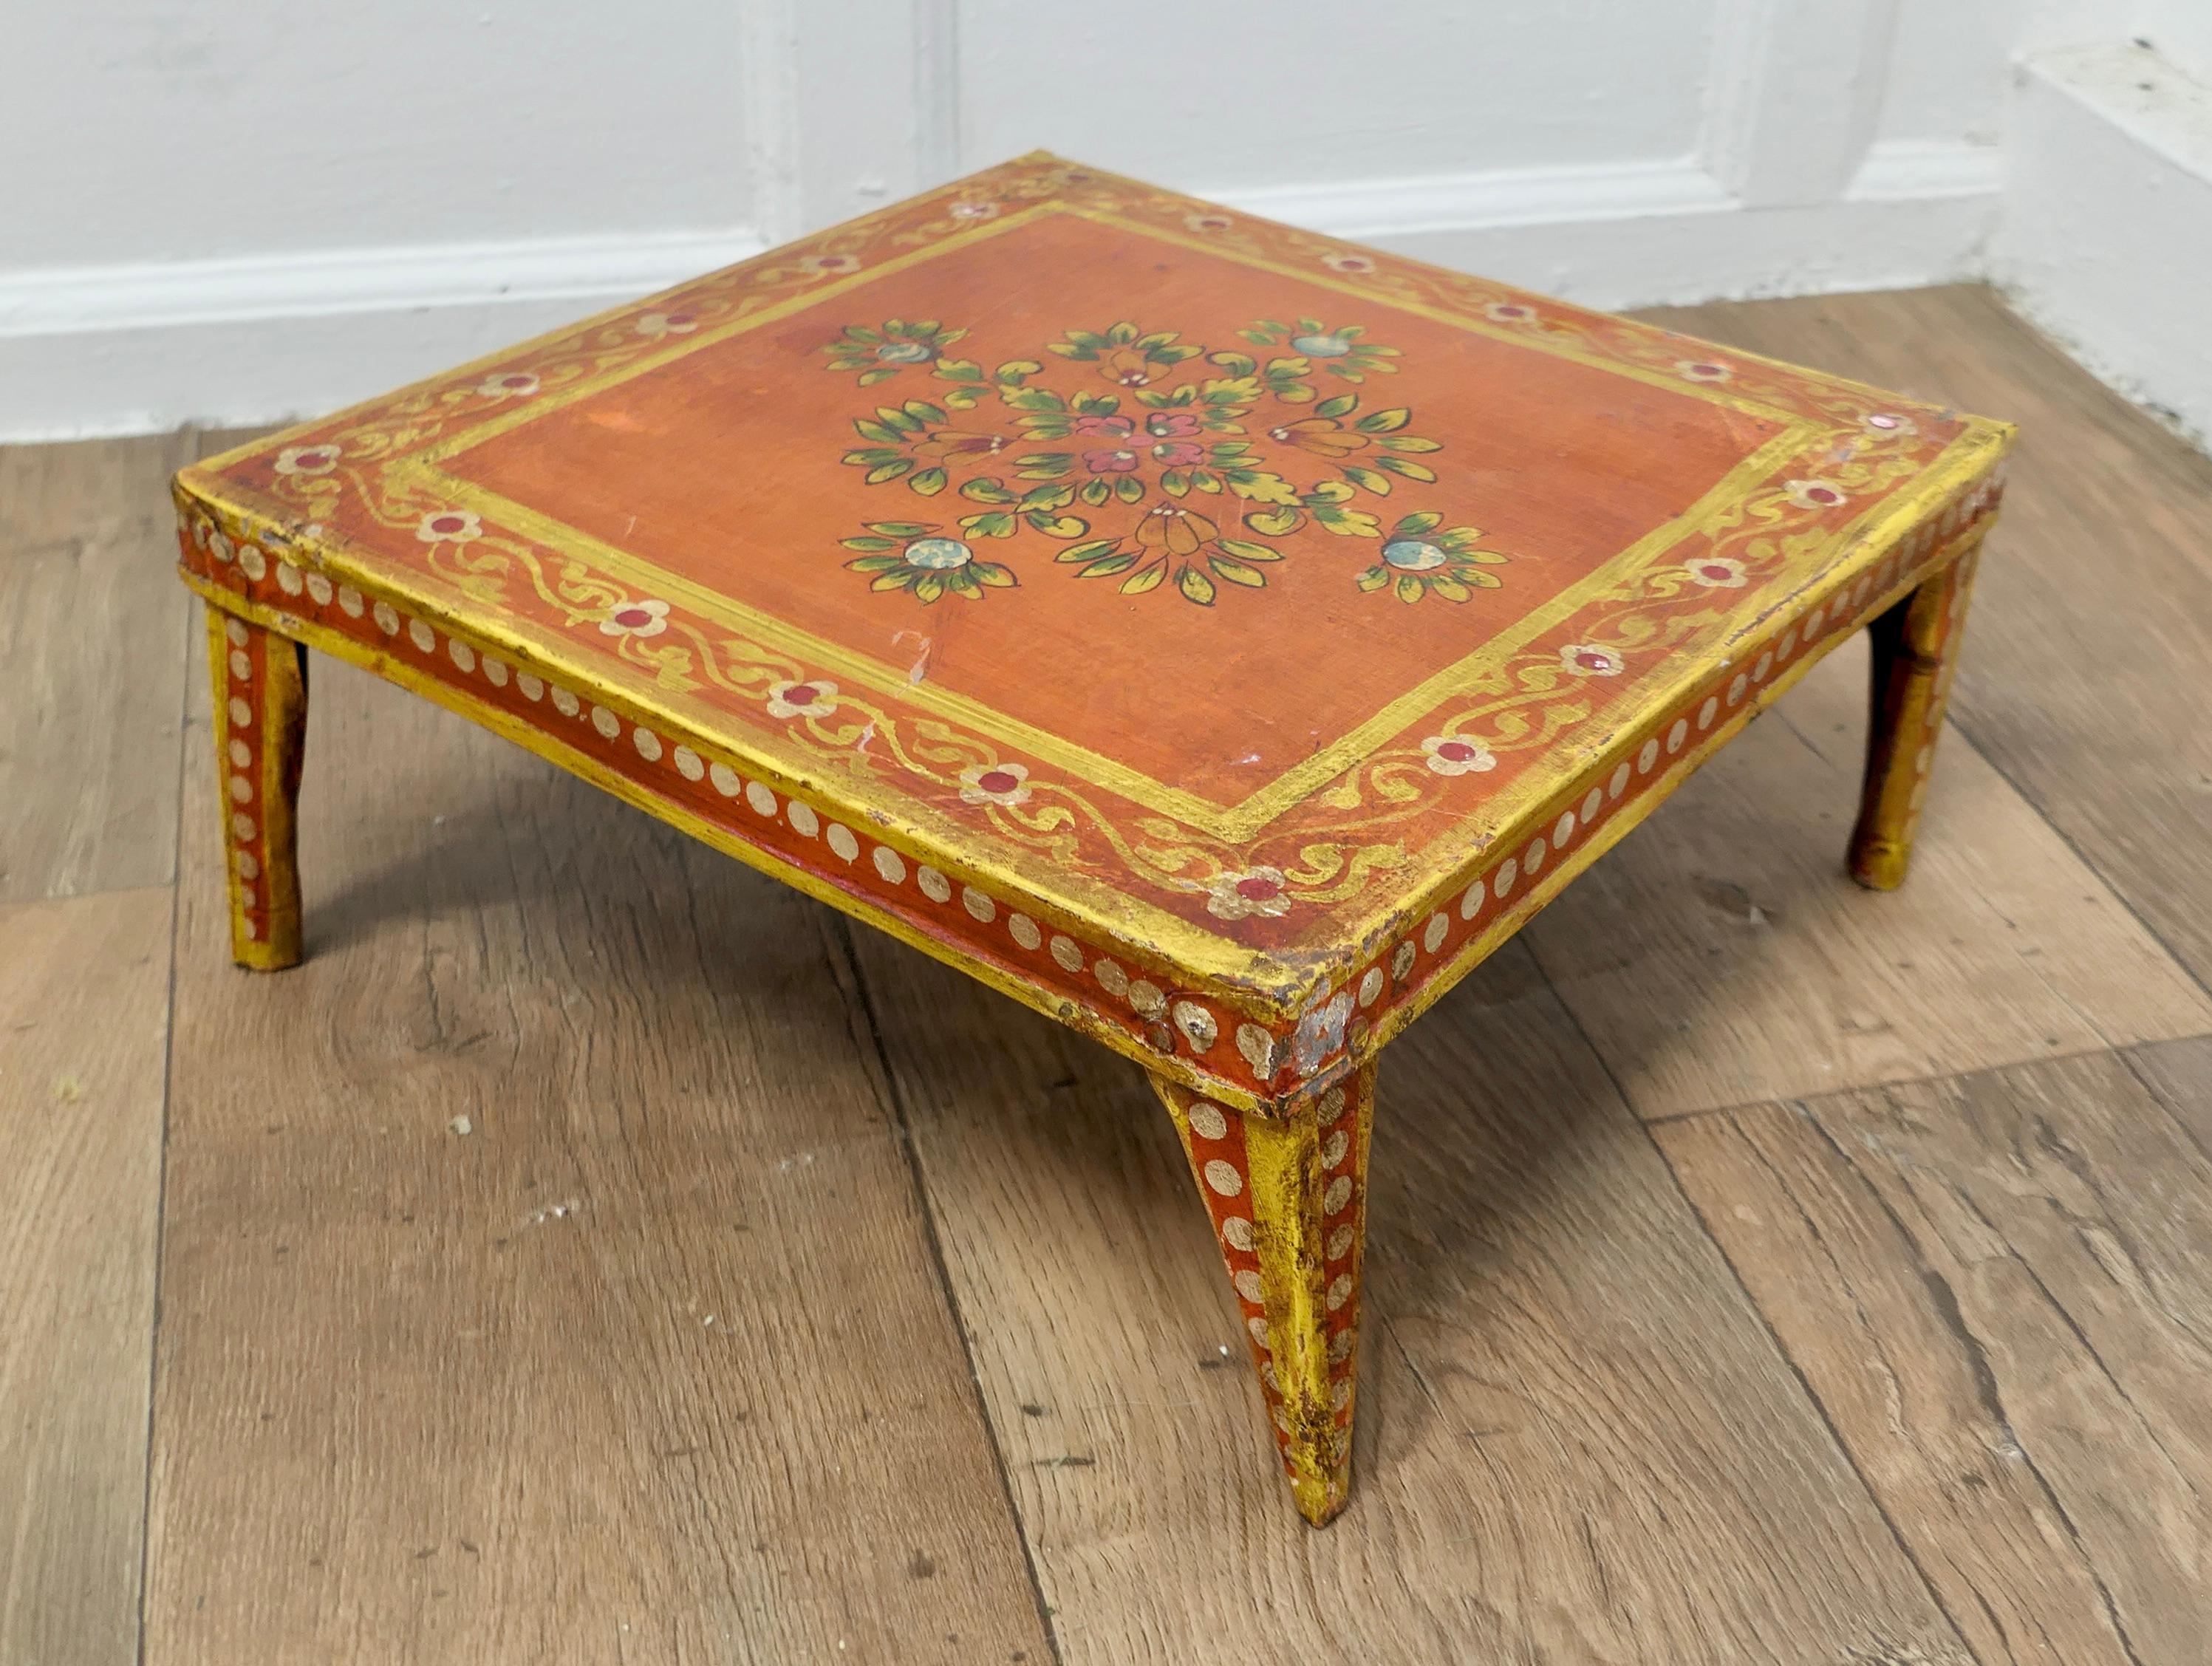 Hand Painted Indian Folk Art Stand or Low Table In Good Condition For Sale In Chillerton, Isle of Wight